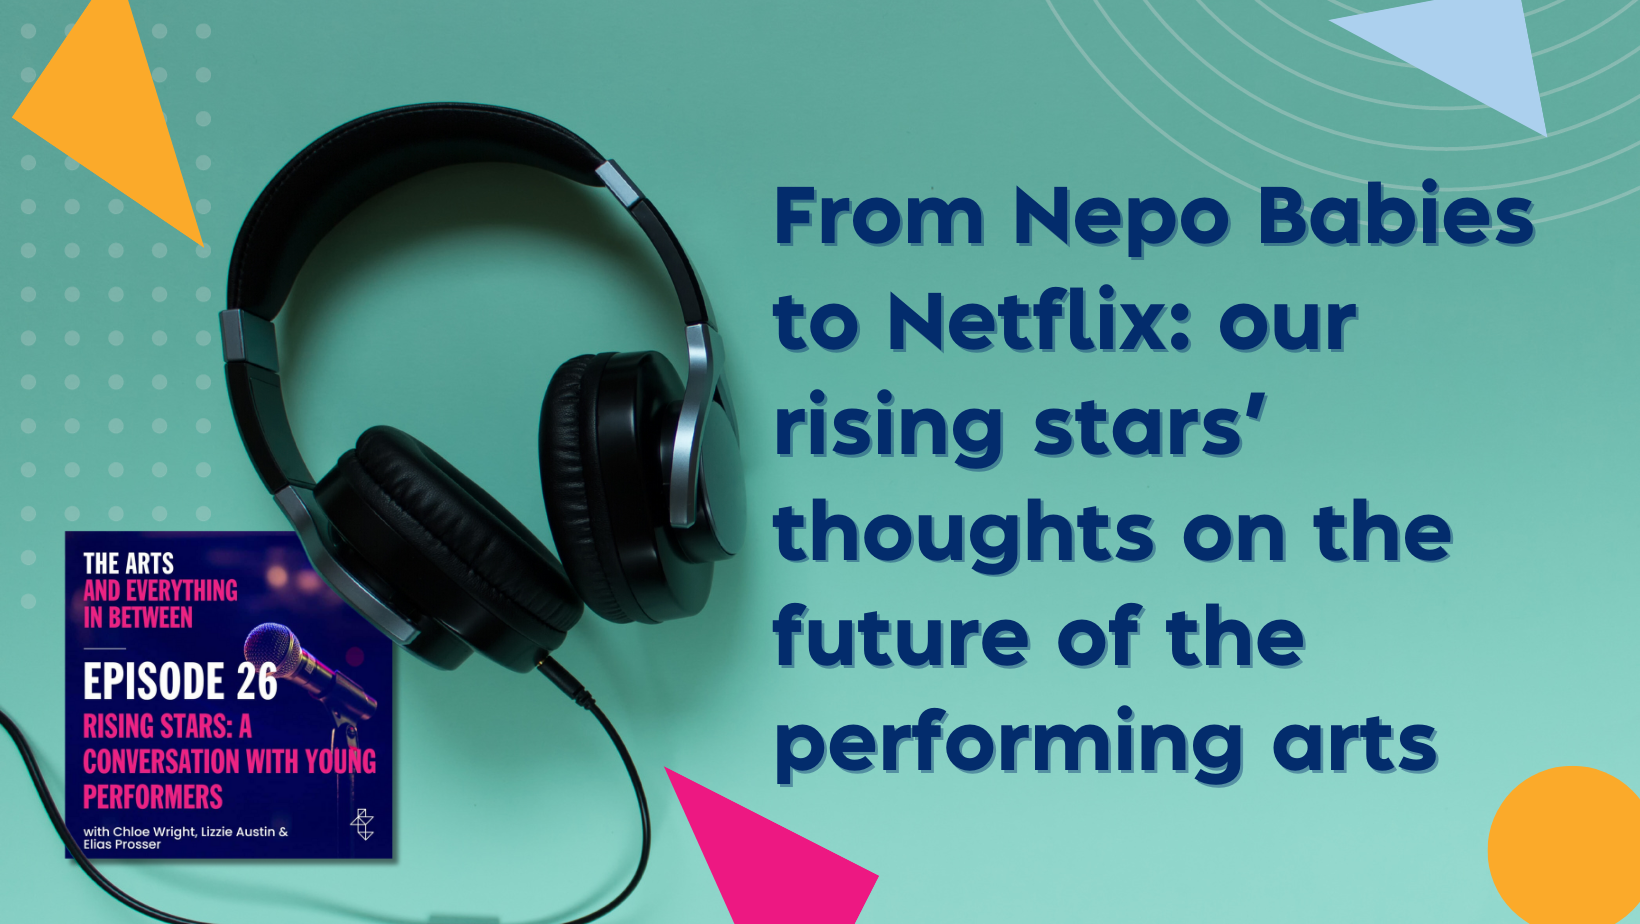 From Nepo Babies to Netflix: Our rising stars’ thoughts on the future of the performing arts